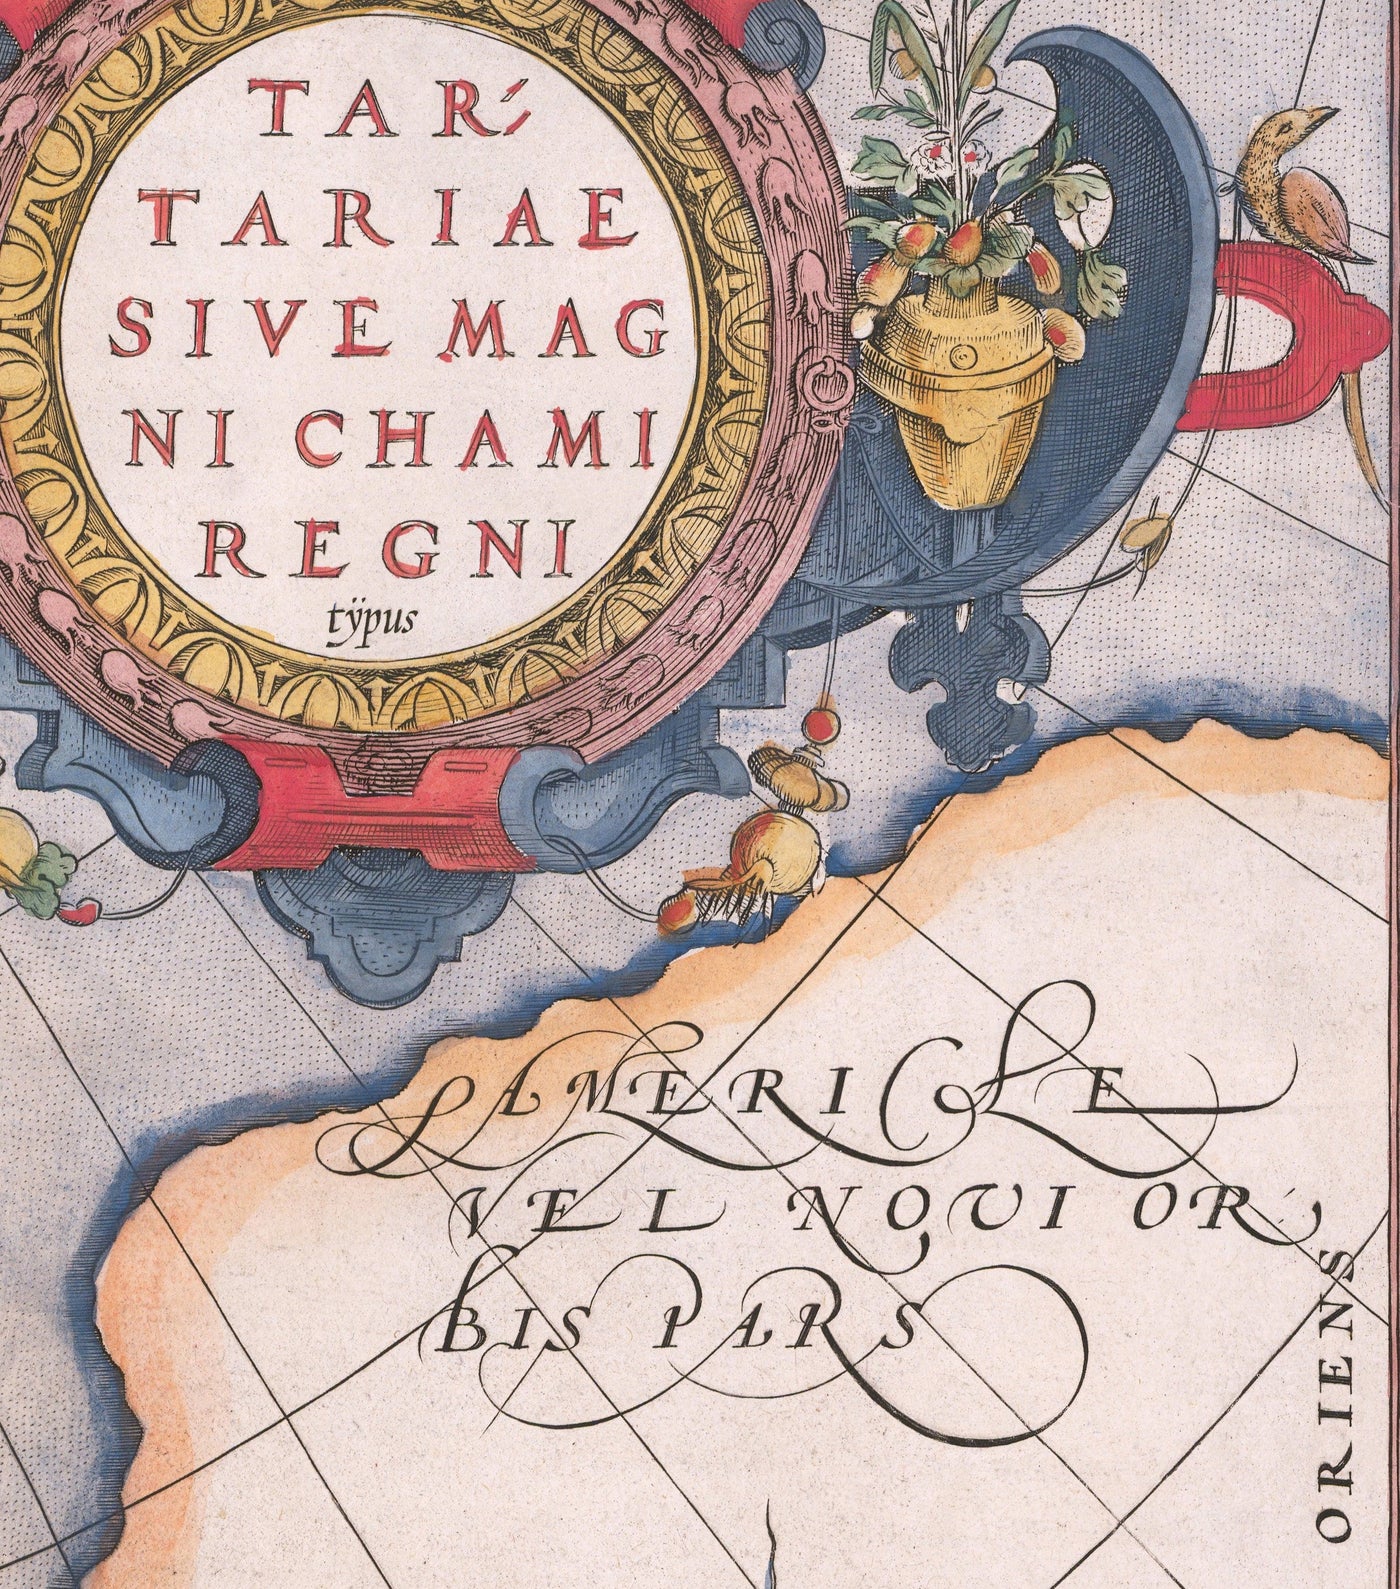 Old Map of Tartary (Russia, Siberia, China) in 1584 by Ortelius - Rare Chart of Central Asia, America, Japan